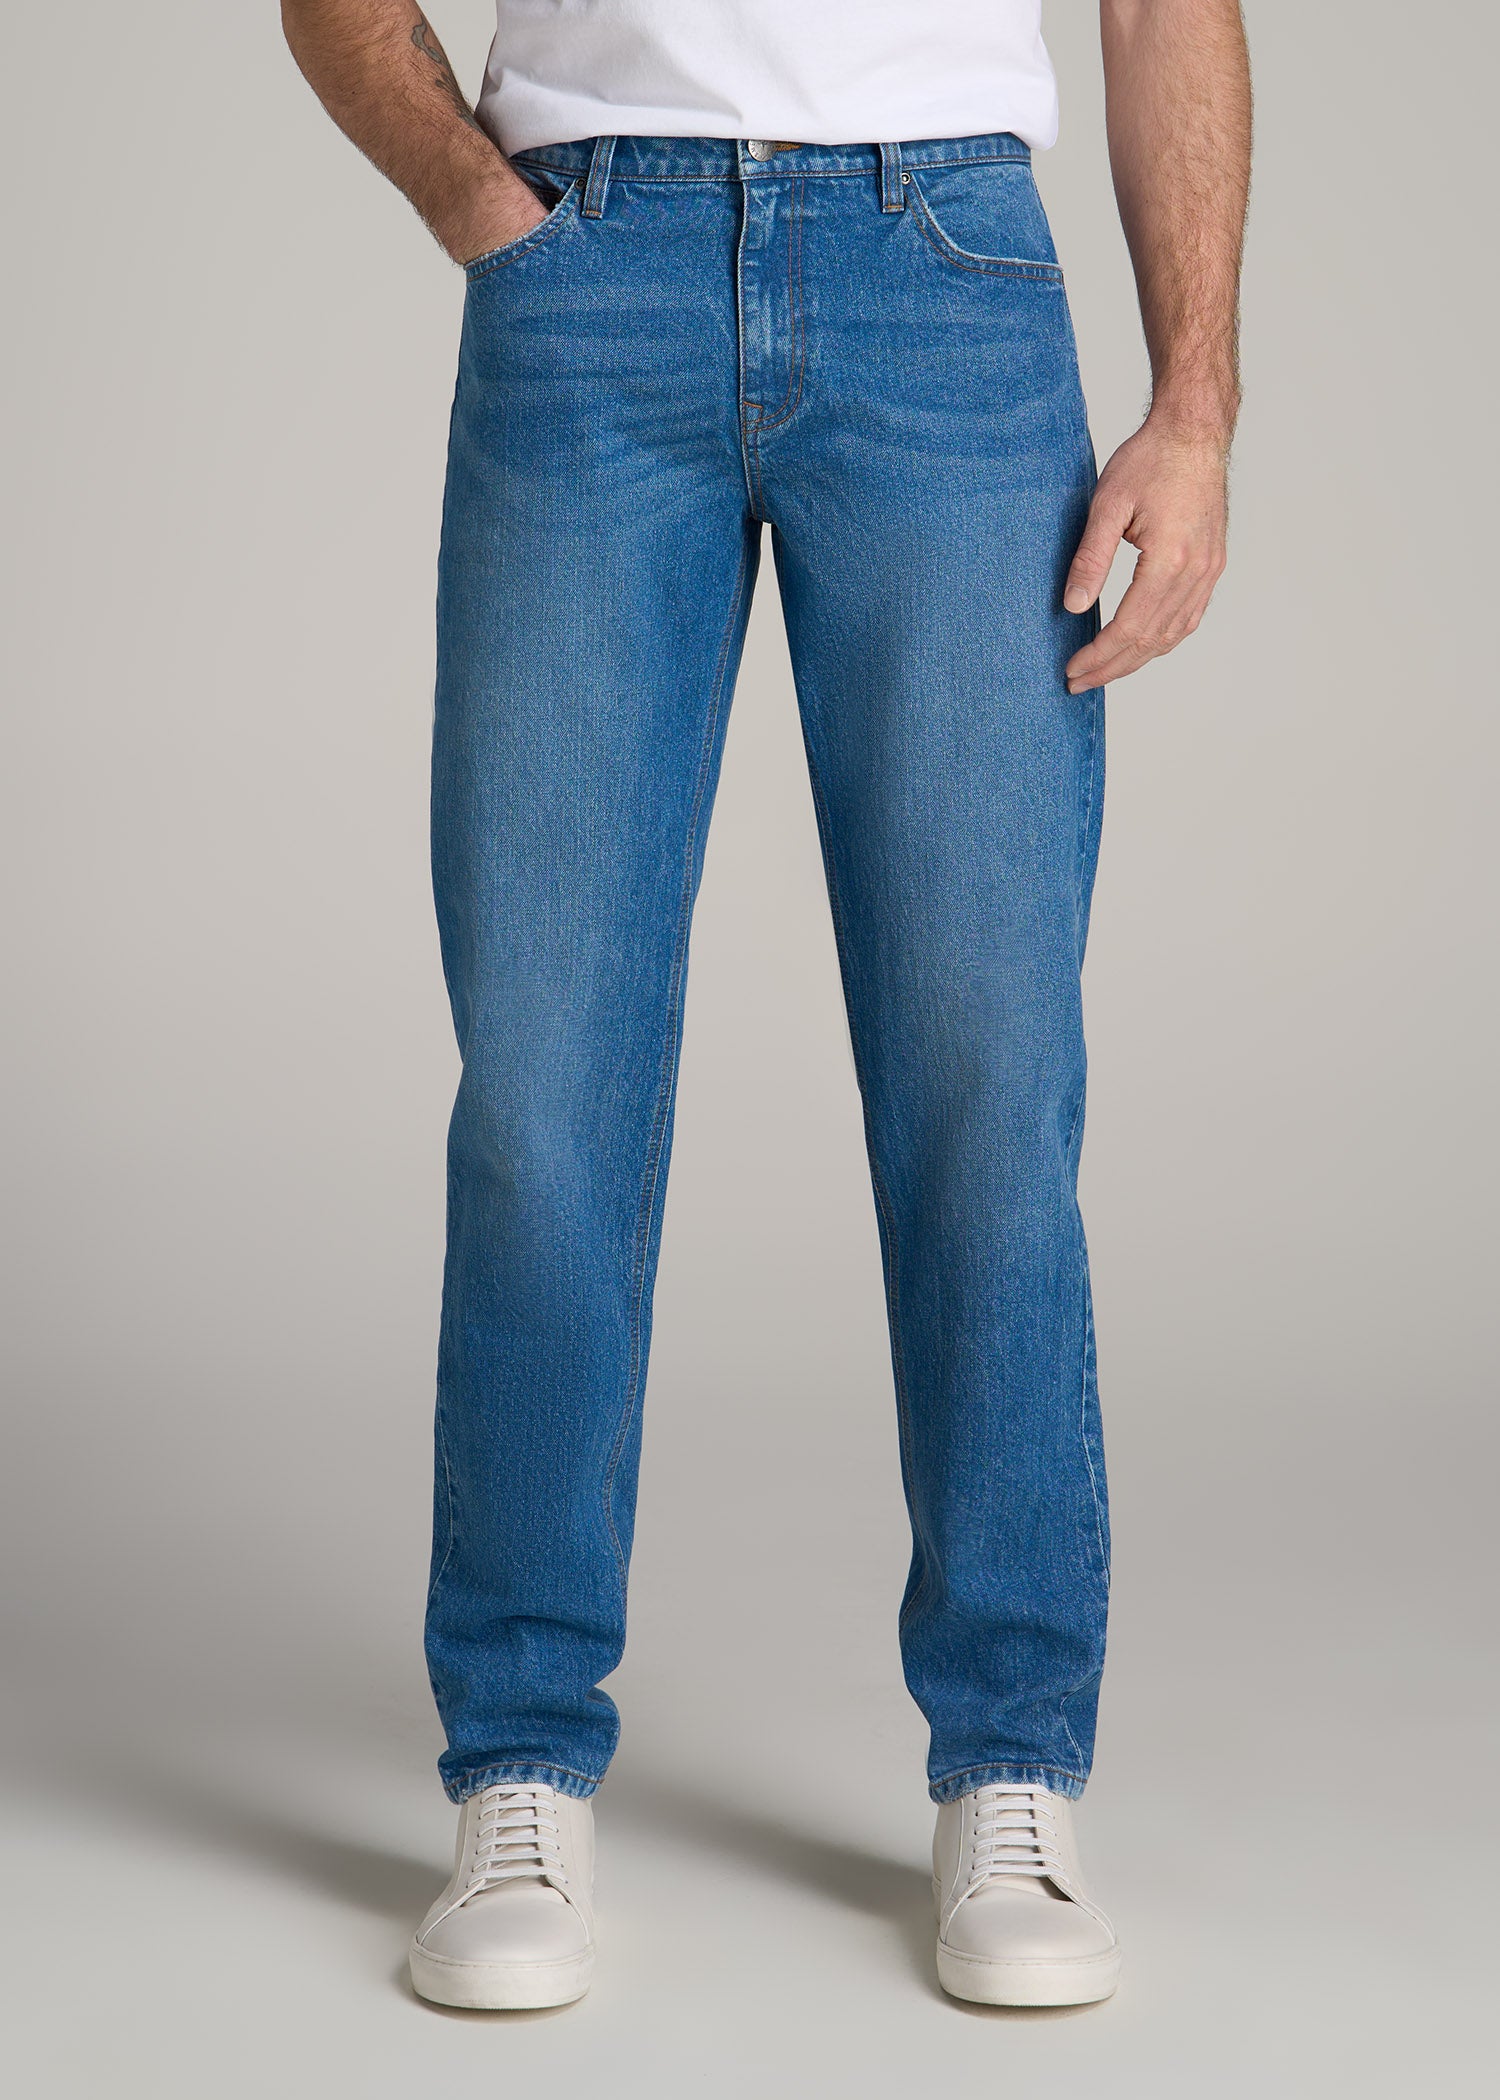 Men's Relaxed Taper Jeans